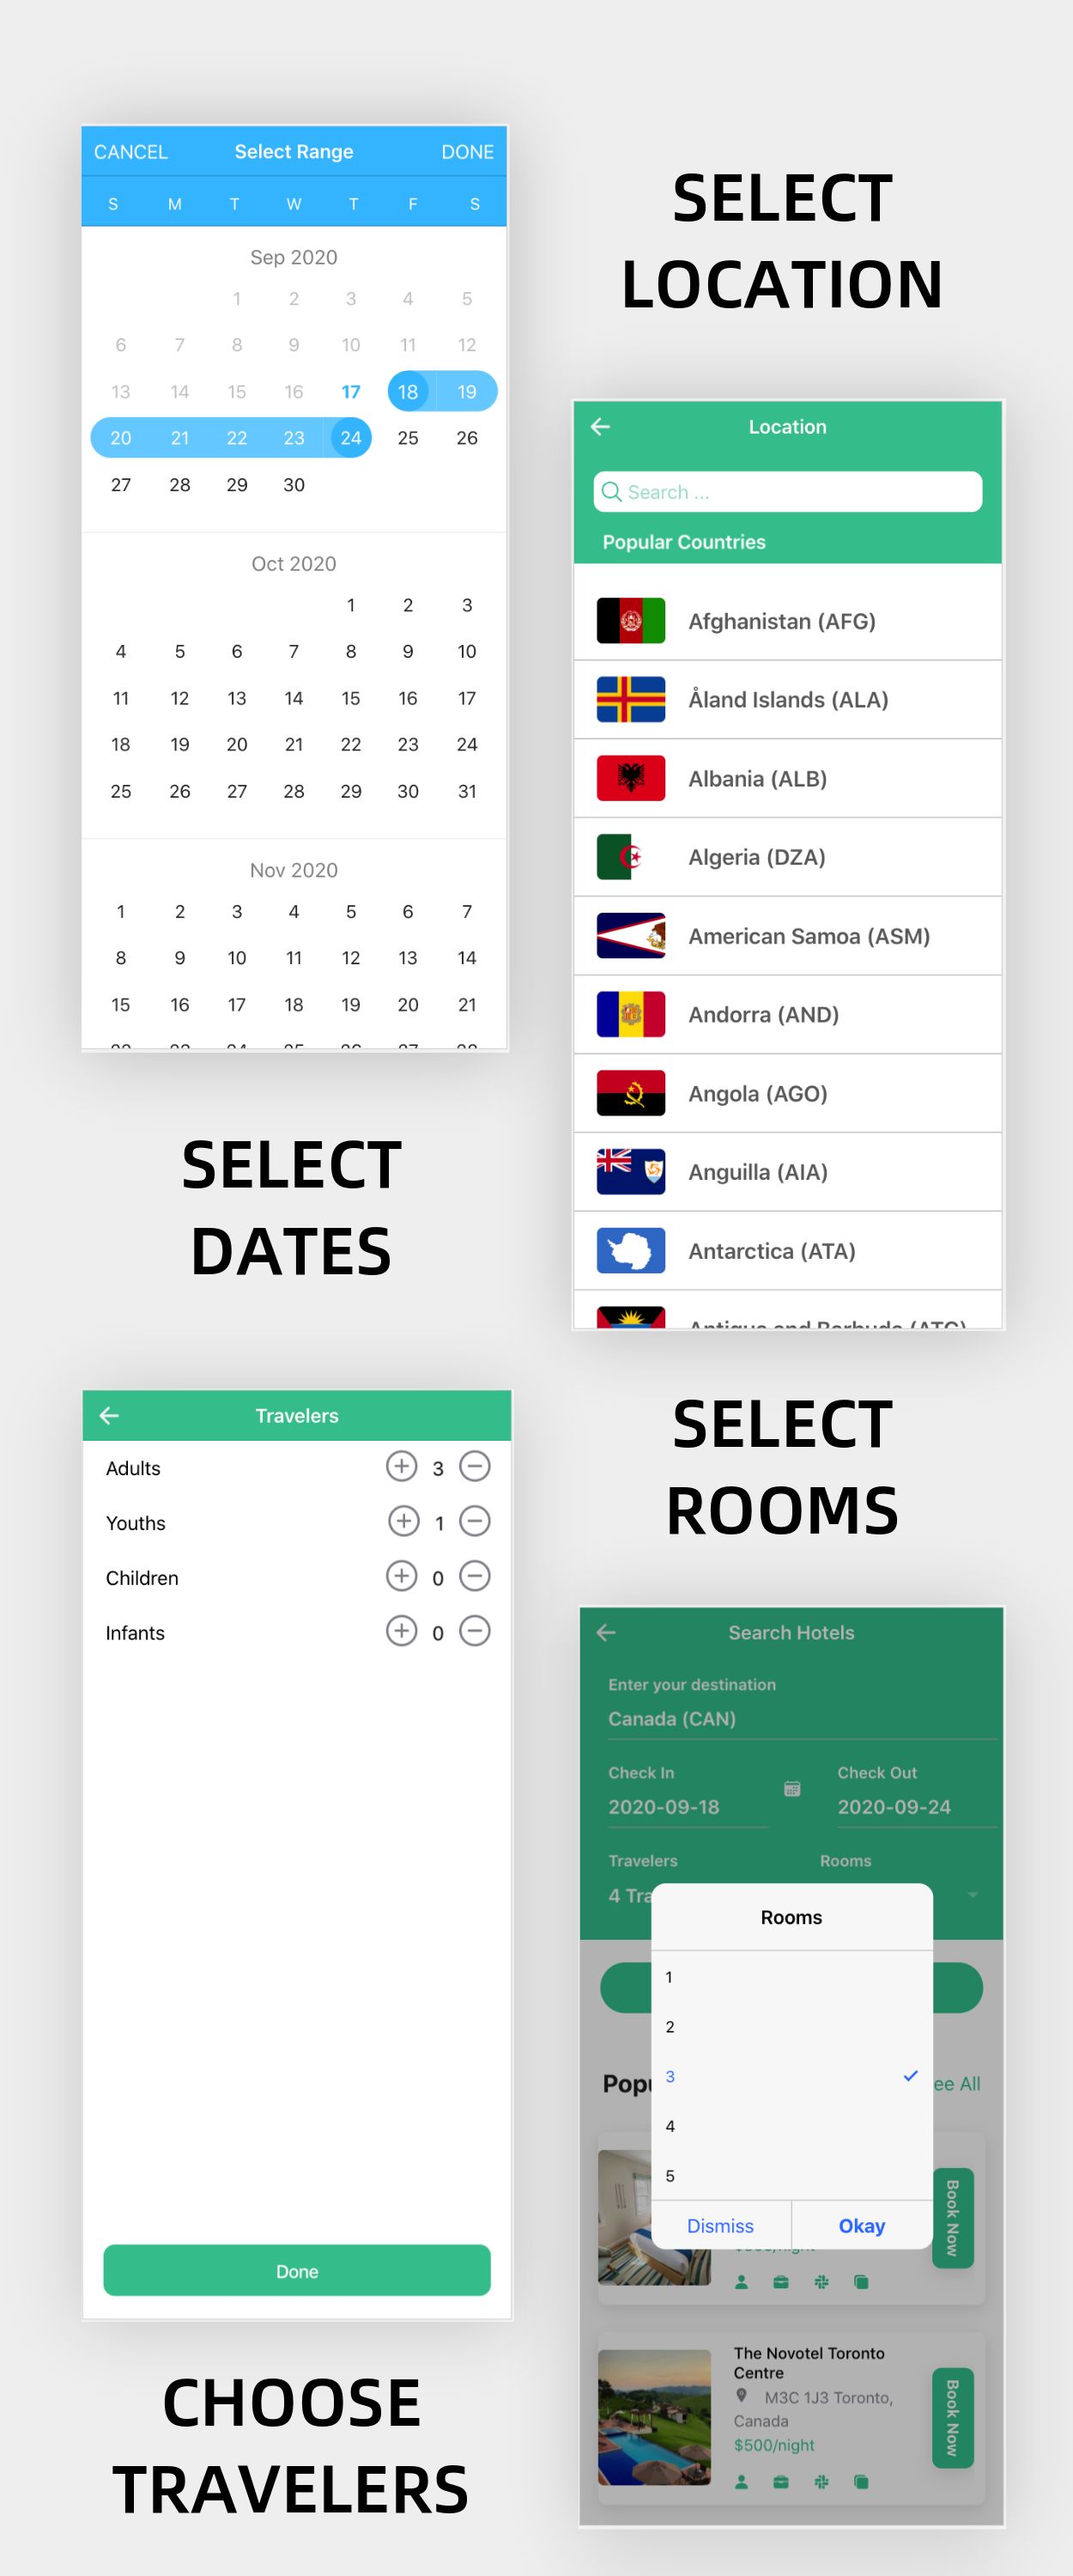 Hillside - A Hotel Booking Theme UI App By Ionic 5 Angular 9 (Latest) - 10